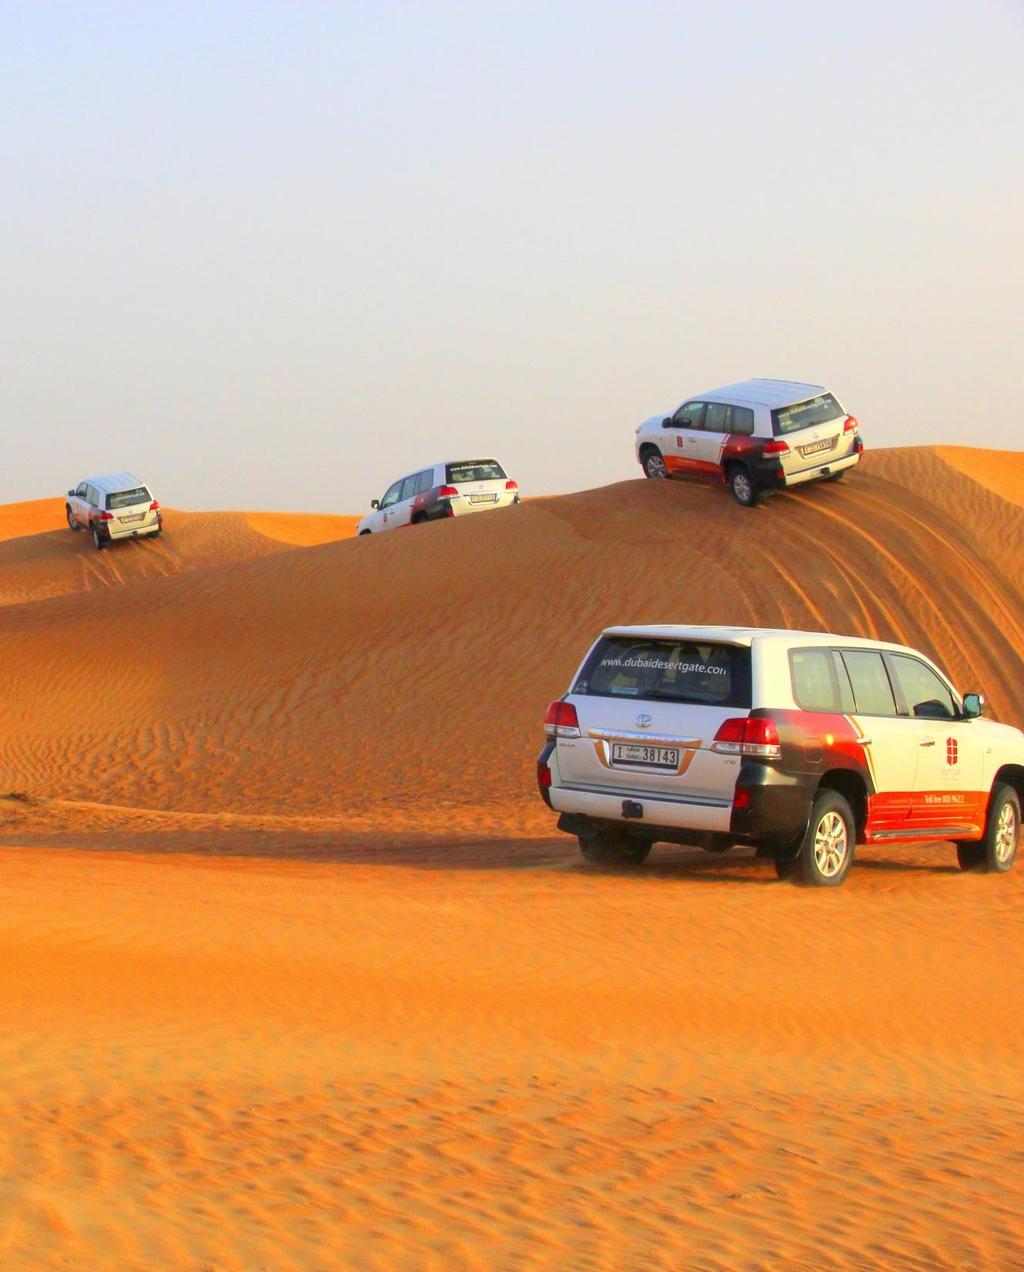 AFTERNOON DESERT SAFARI & BBQ DINNER The ever-changing patterns of the Arabian sands would last unforgettable impressions.